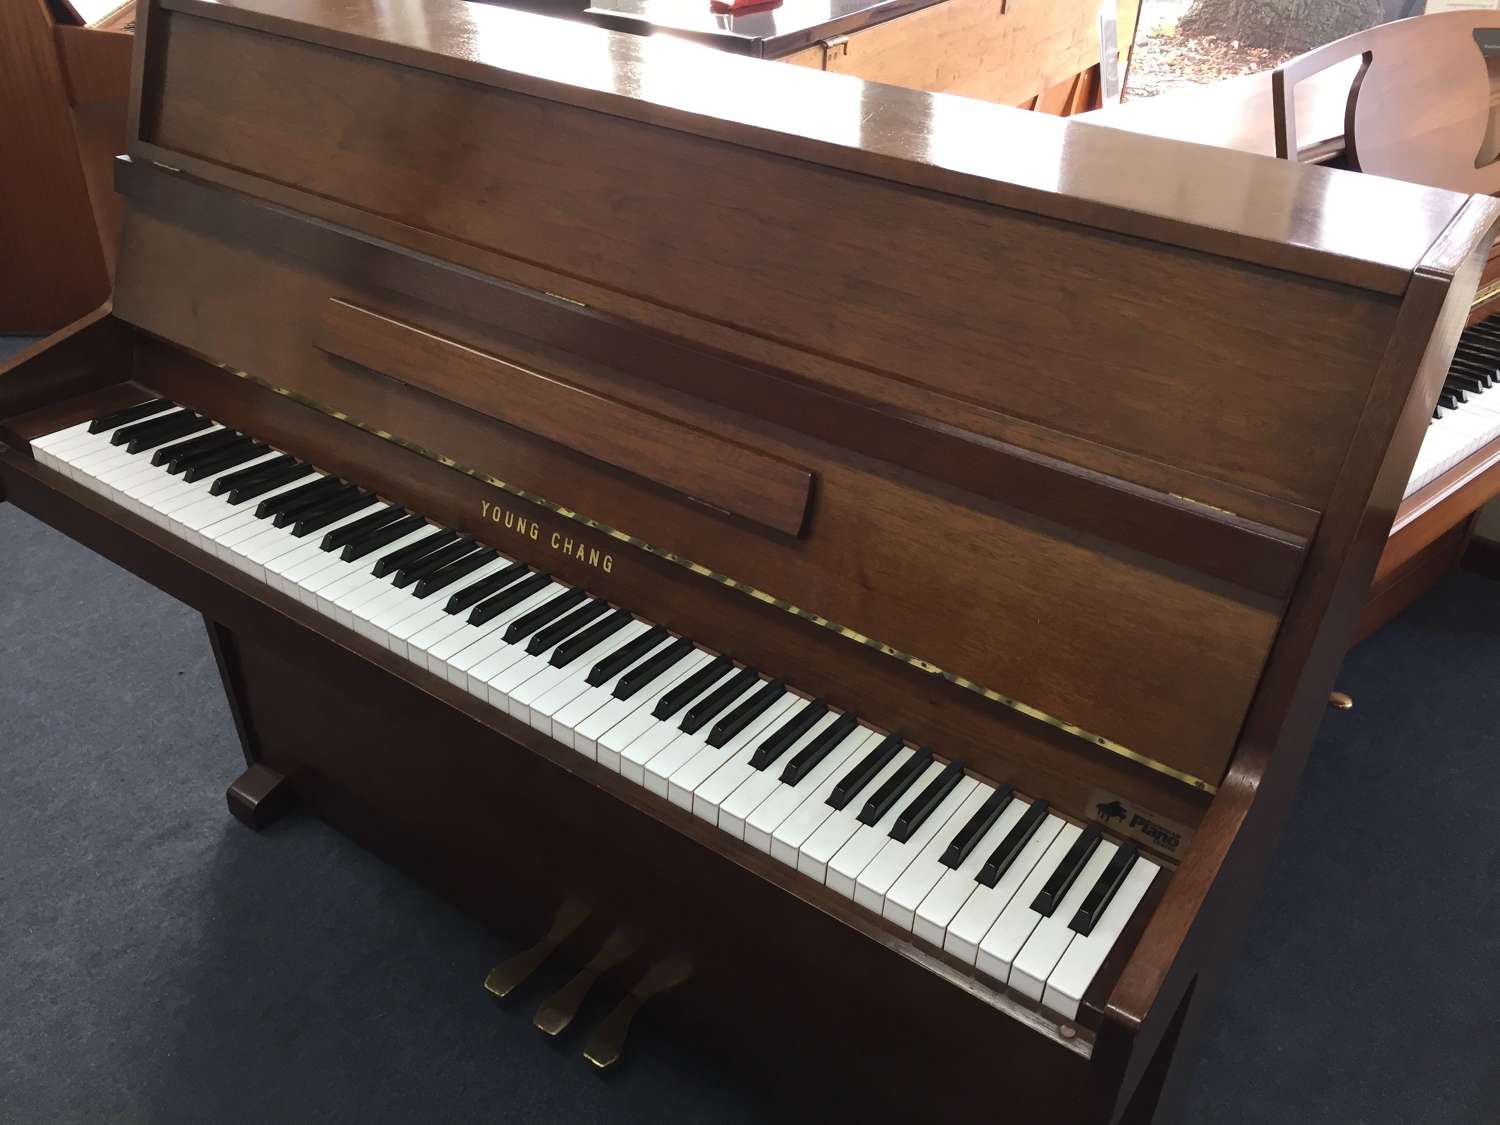 Young Chang modern piano for sale